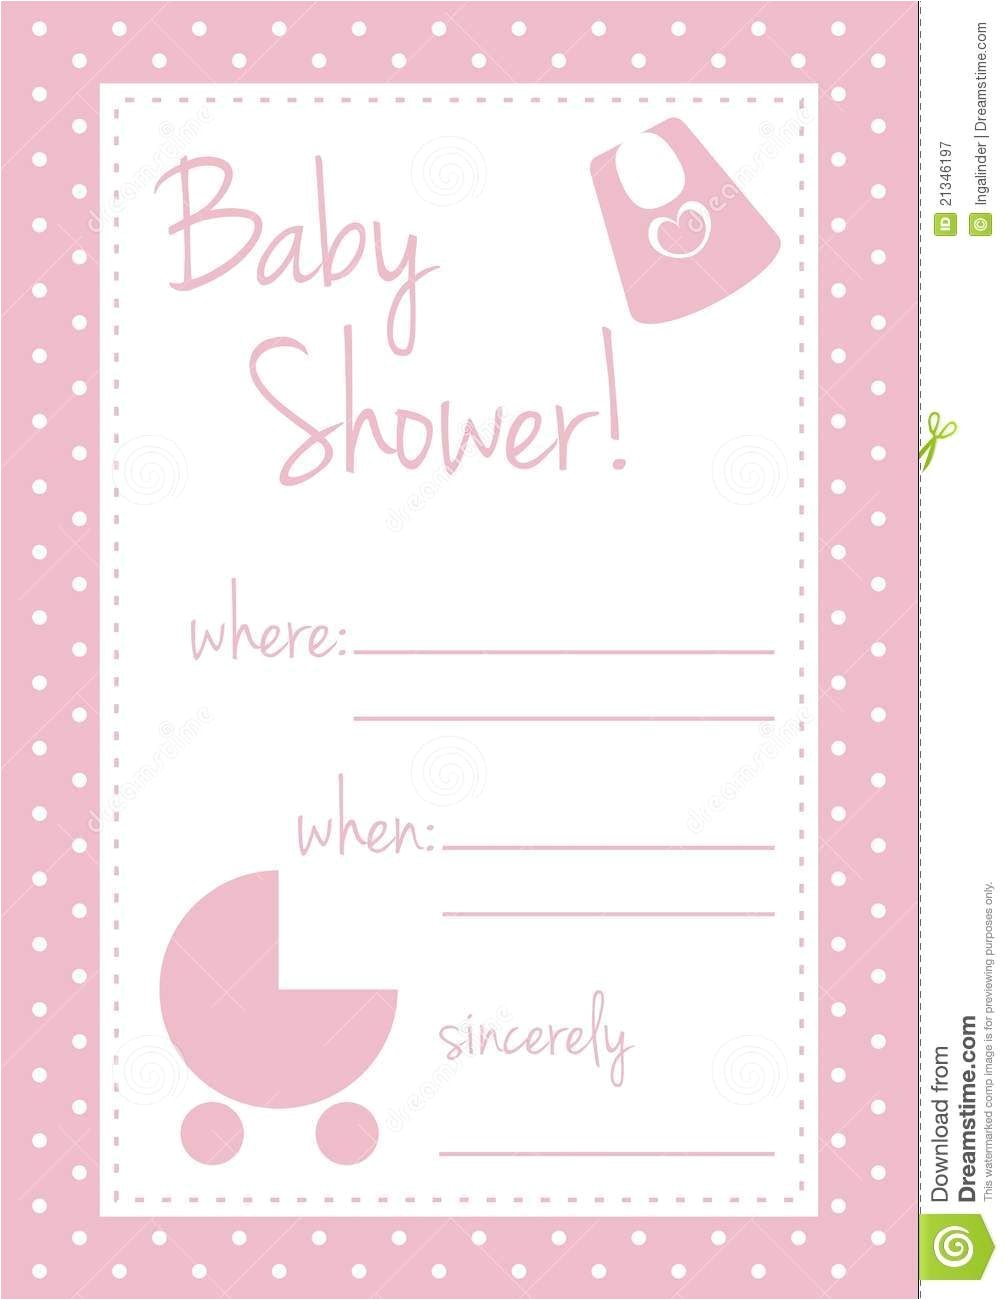 Baby Shower Invitation Cards for Girls Baby Shower Invitation Card